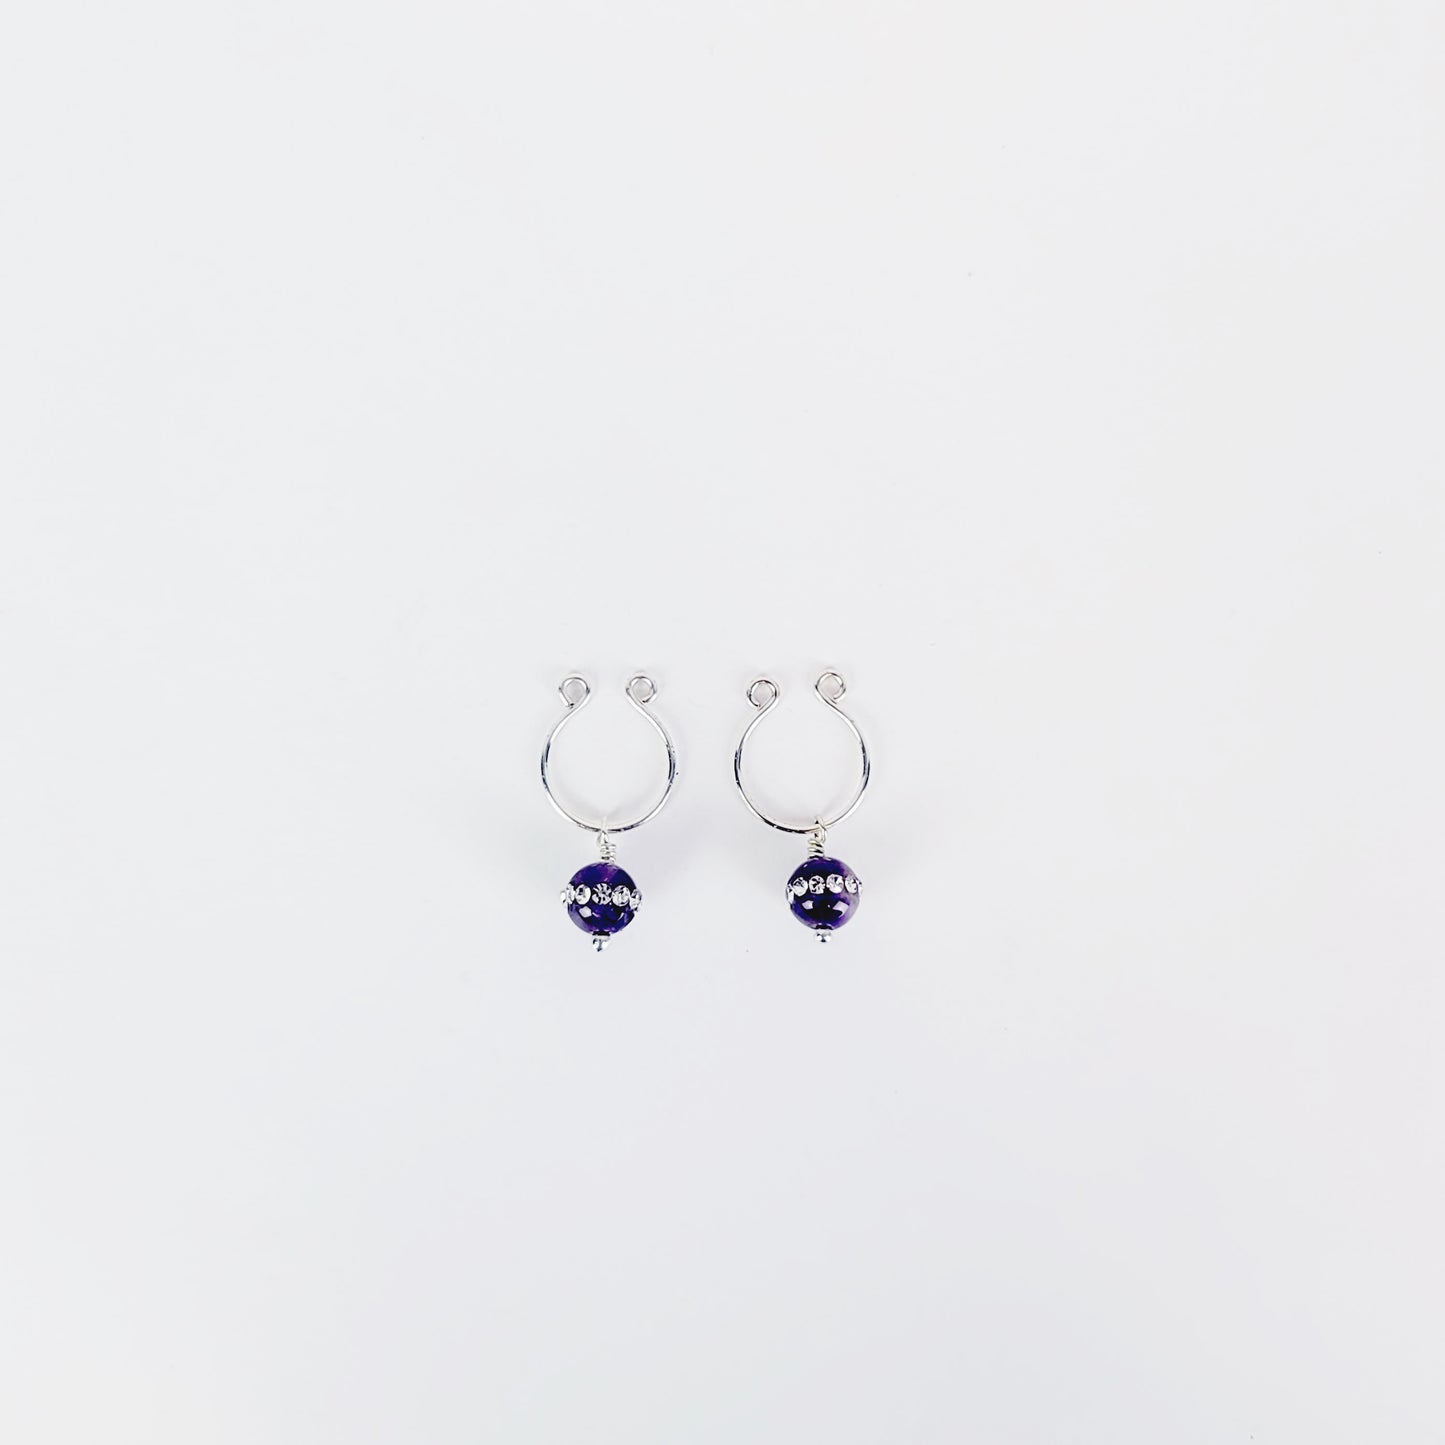 Nipple Rings with Amethyst or Rose Quartz Beads, Non Piercing. Horseshoe Style